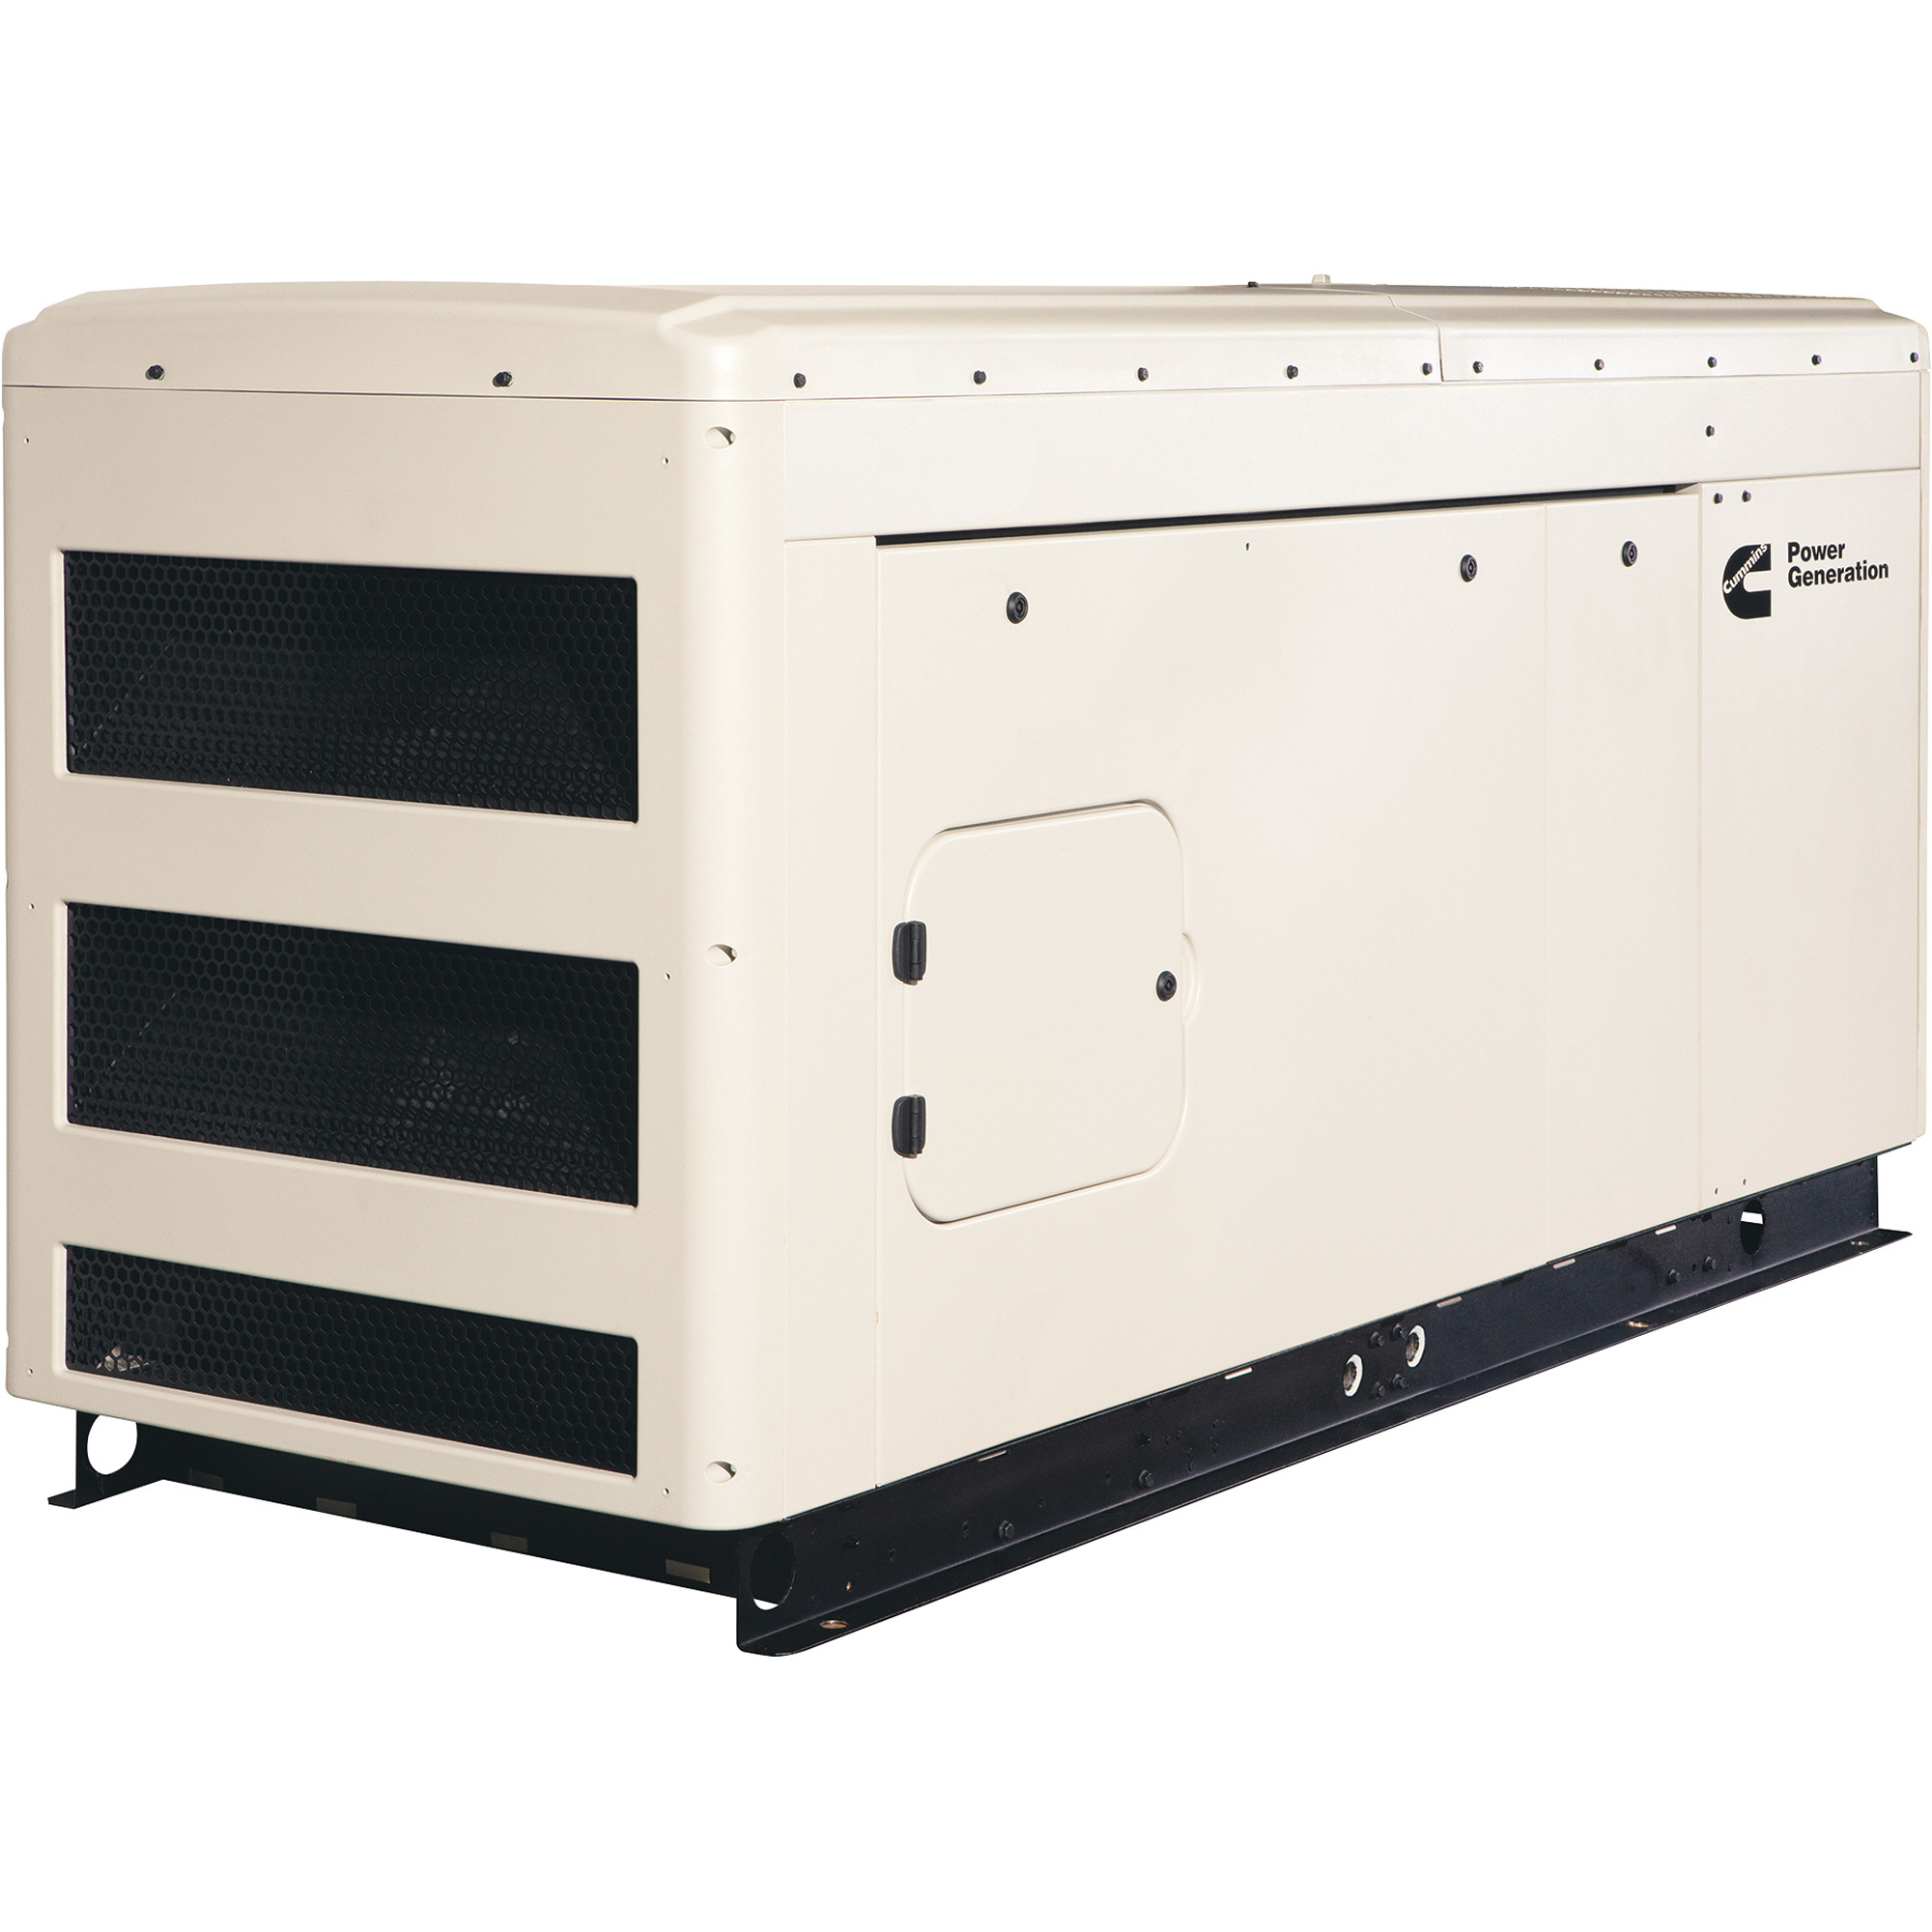 Cummins Commercial Standby Generator 40kW, LP/NG, 277/480 Volts, 3 Phase